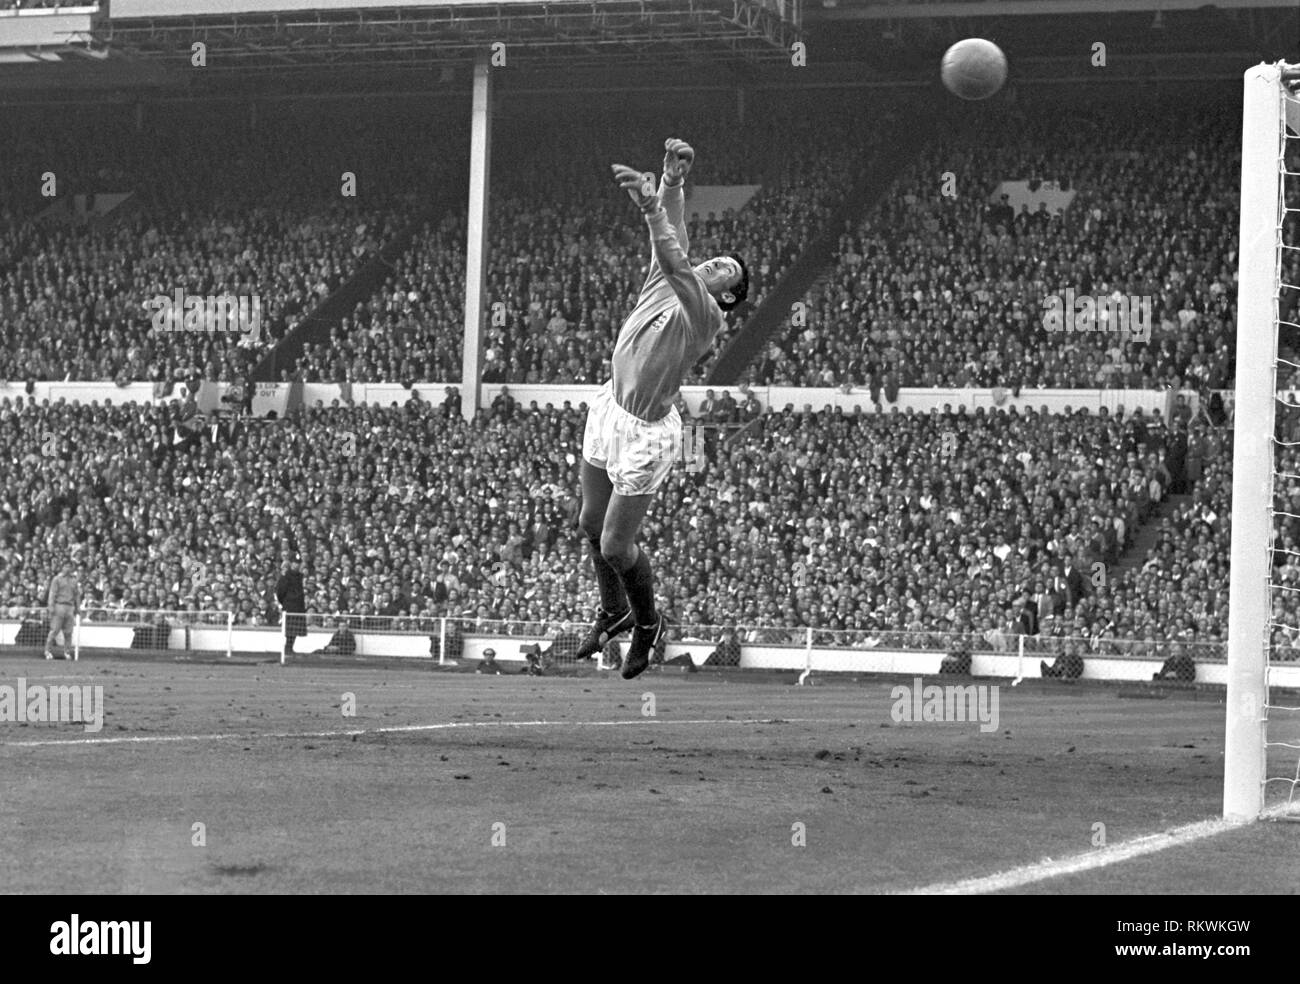 30.07.1966. Wembley Stadium, London England. 1966 World Cup final England versus Germany (4-2) After Extra time. English goalkeeper Gordon Banks in diving save action. Stock Photo